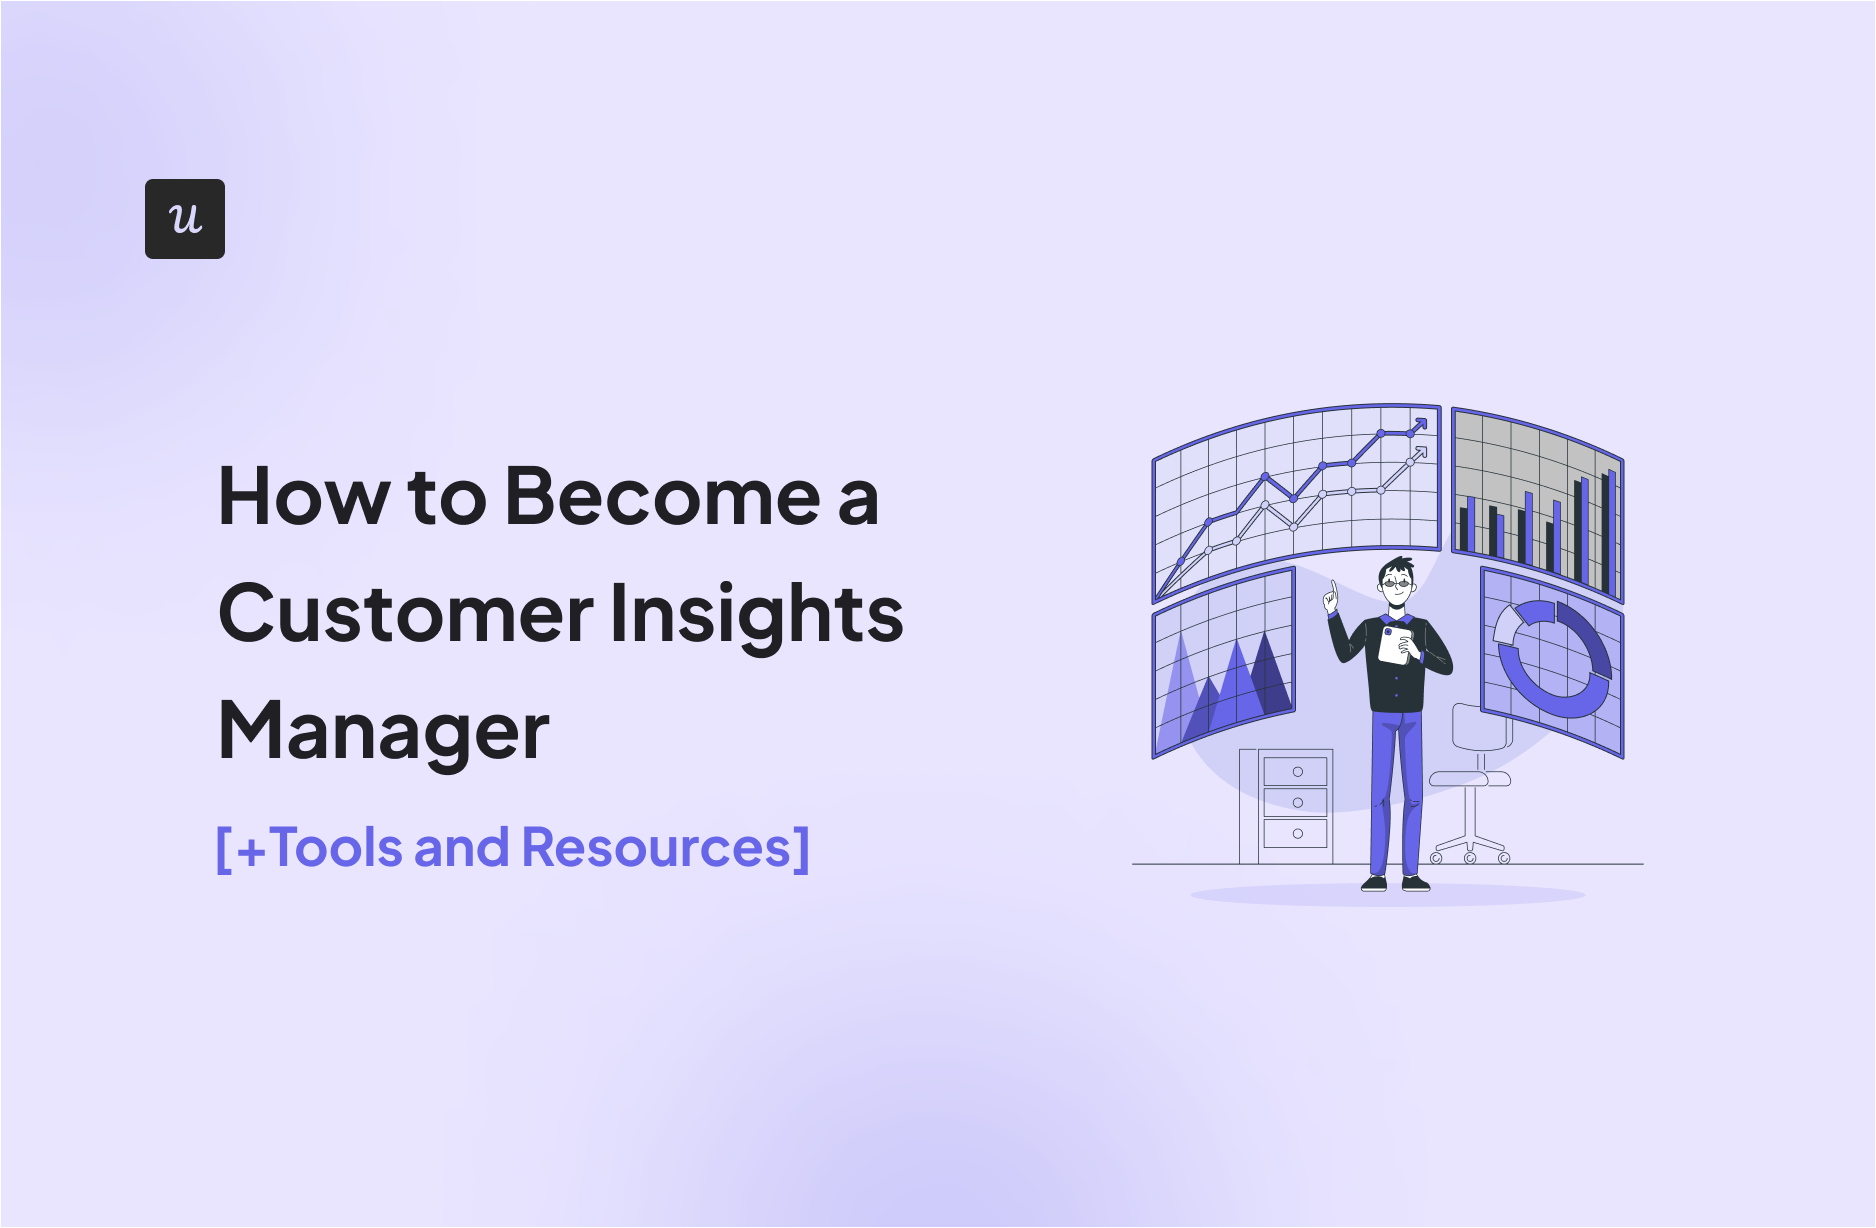 How to Become a Customer Insights Manager [+Tools and Resources]